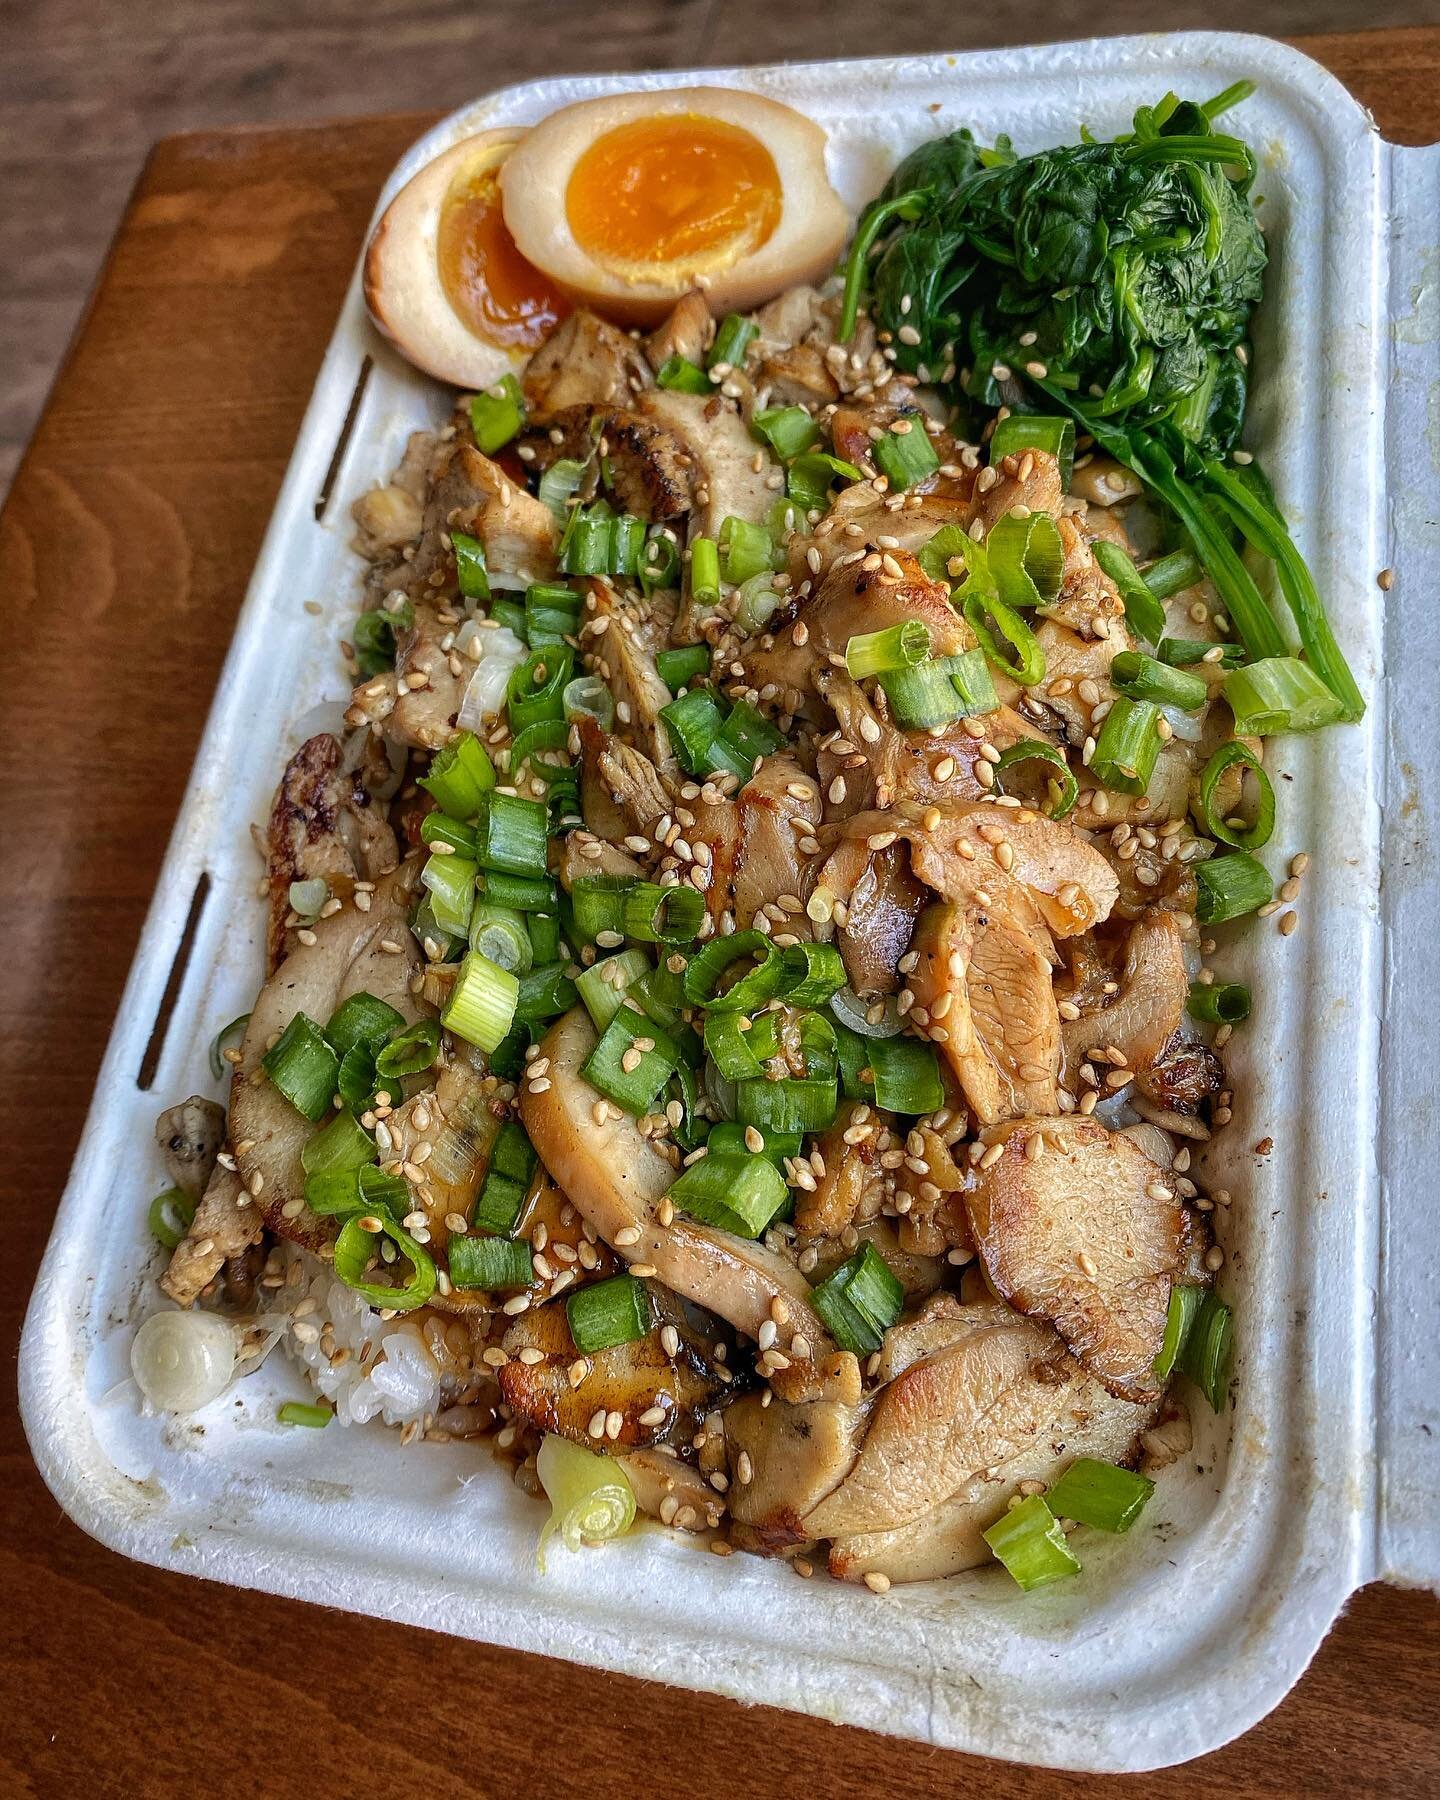 Depending on your appetite you can have our Chicken Bowl in either a Large or Small! 🍚😋 Head online and use the LINK in our bio or find us on @ChowNow, @Postmates, @UberEats, @GrubHub or @DoorDash to place your order for  takeout or delivery today!